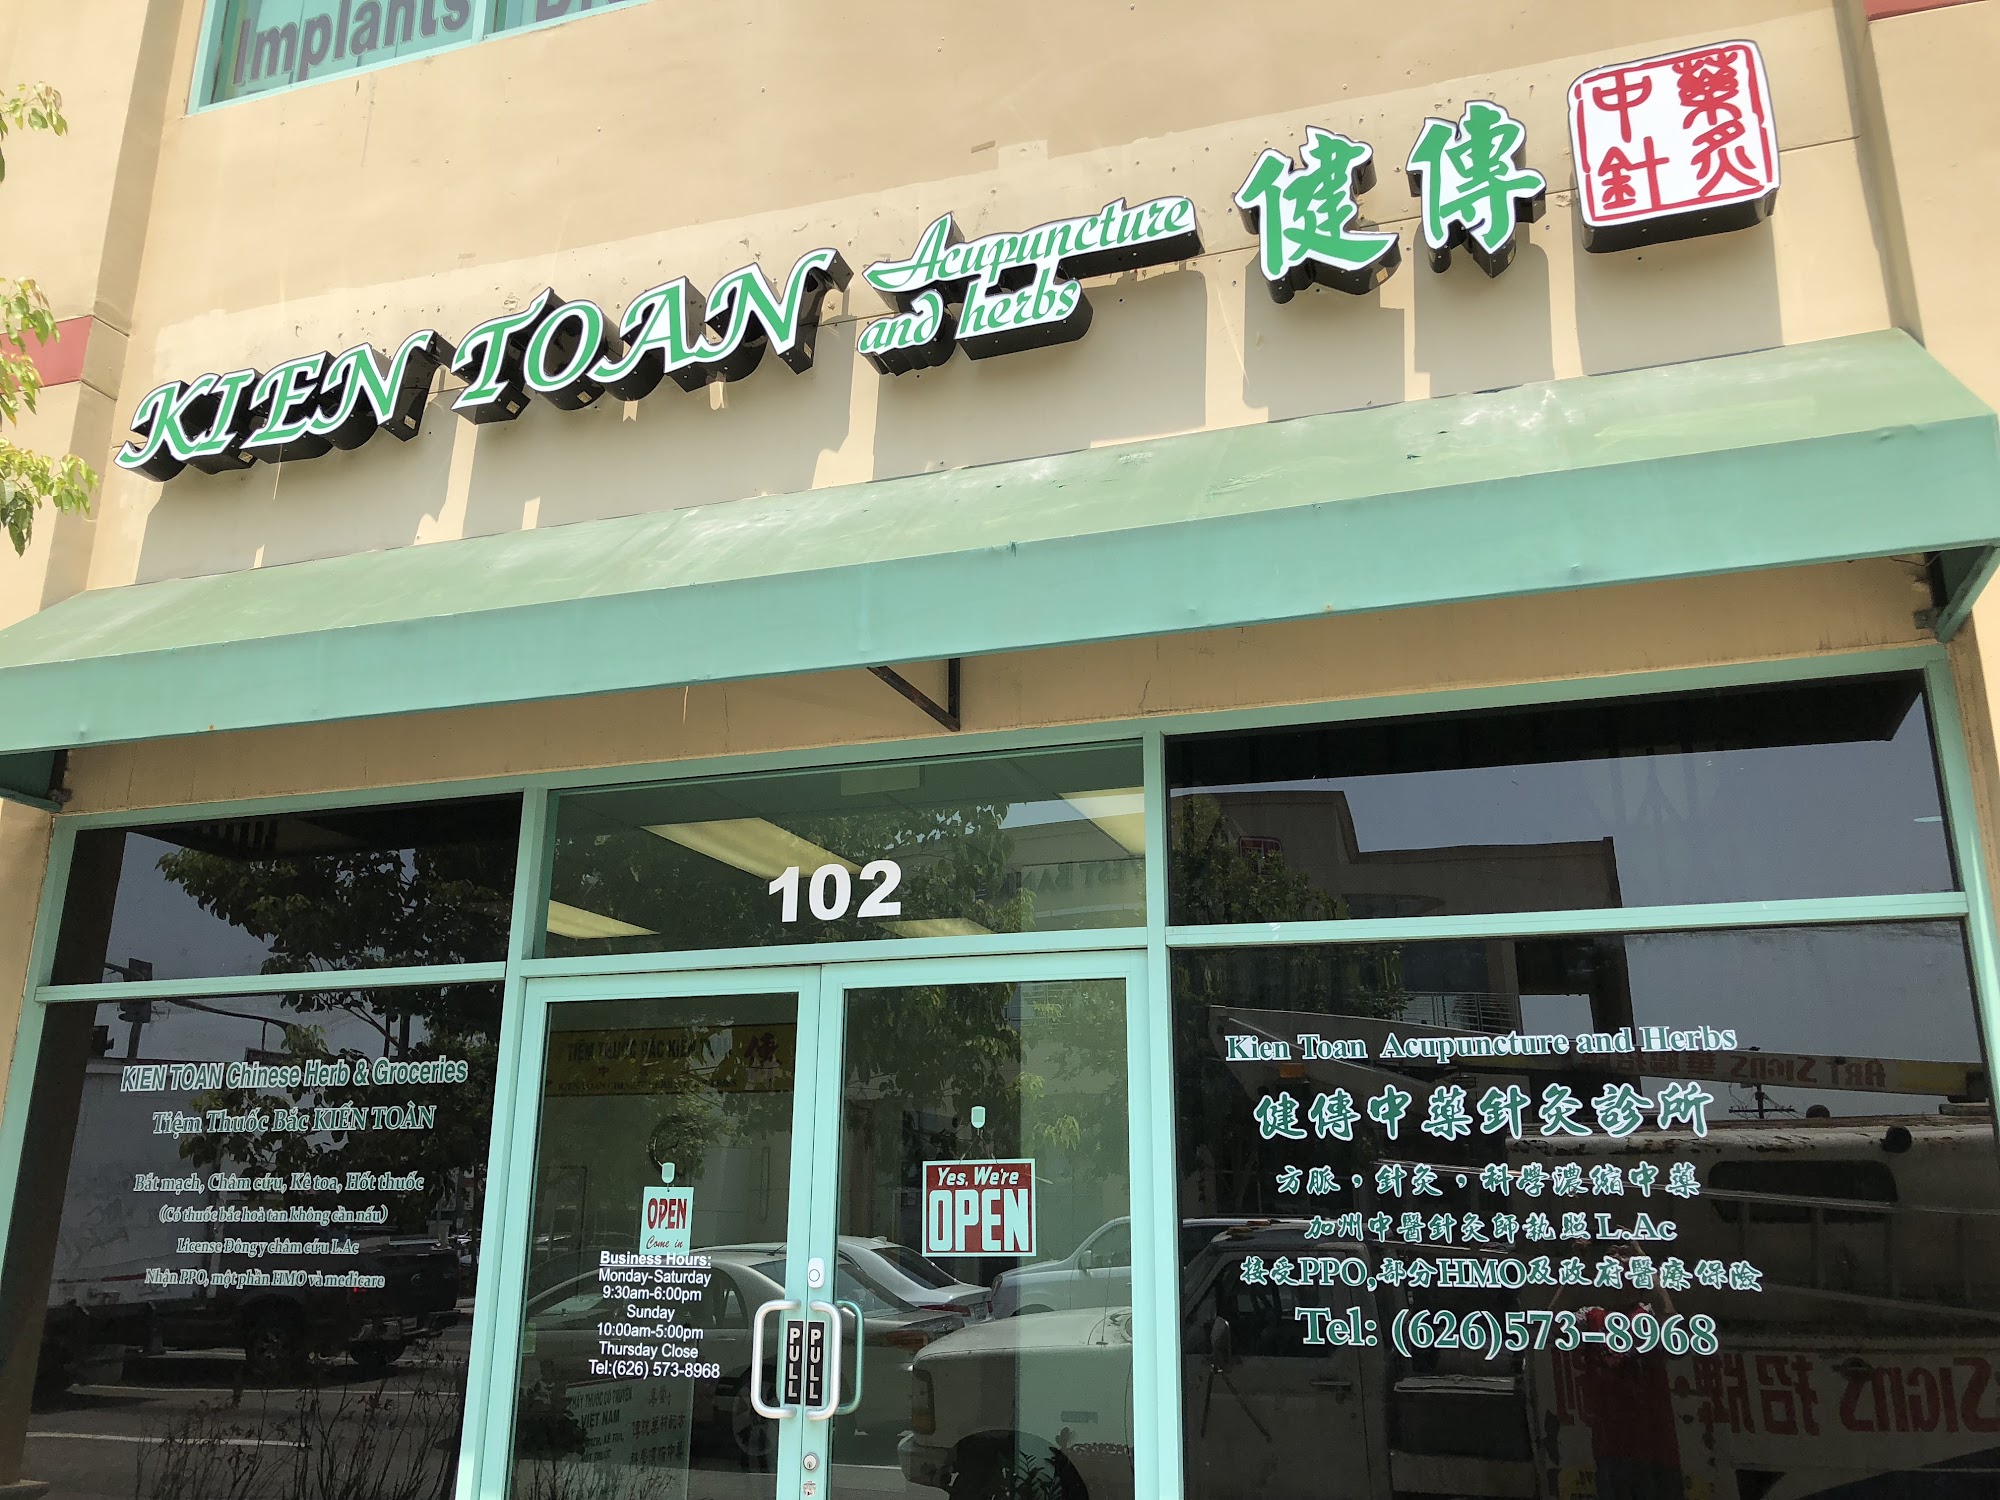 Kien Toan Acupuncture and Herbs